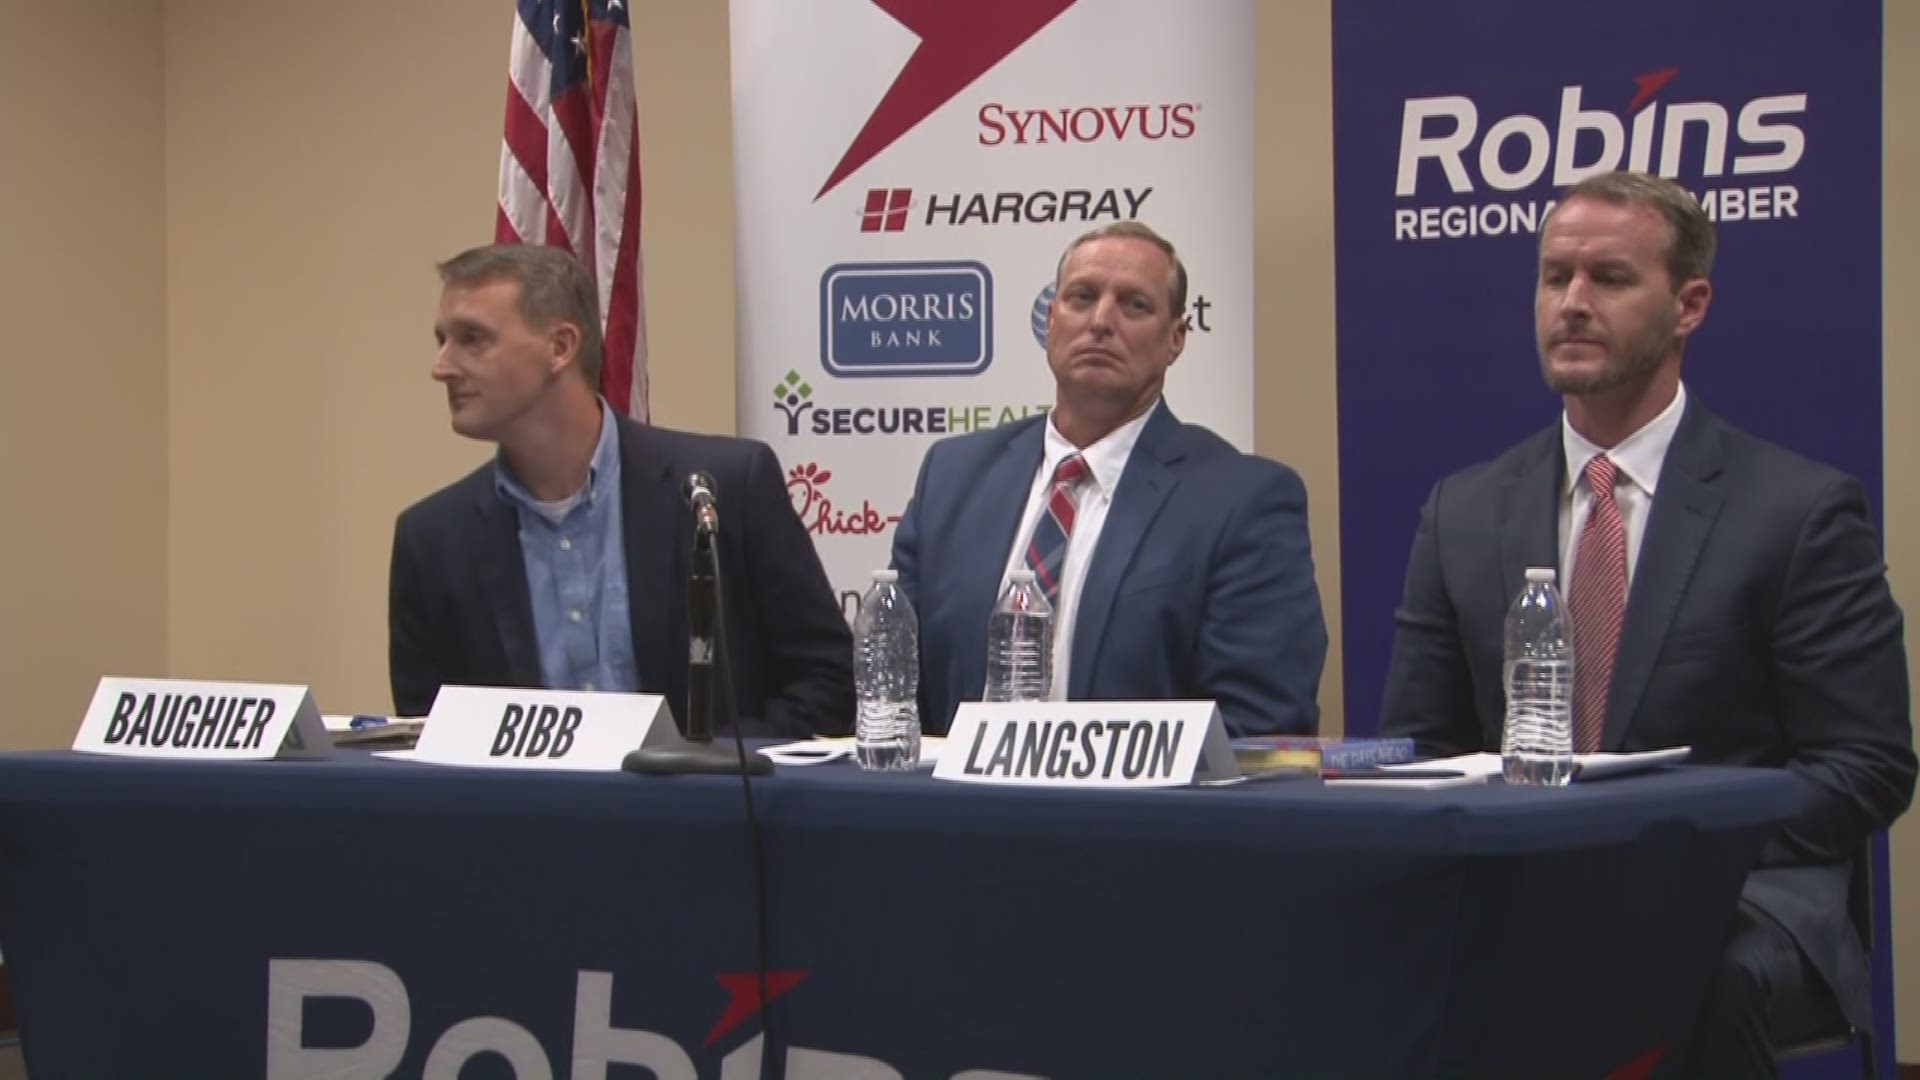 People in Warner Robins heard from city council candidates in a Robins Regional Chamber political forum at the Central Georgia Technical College auditorium.